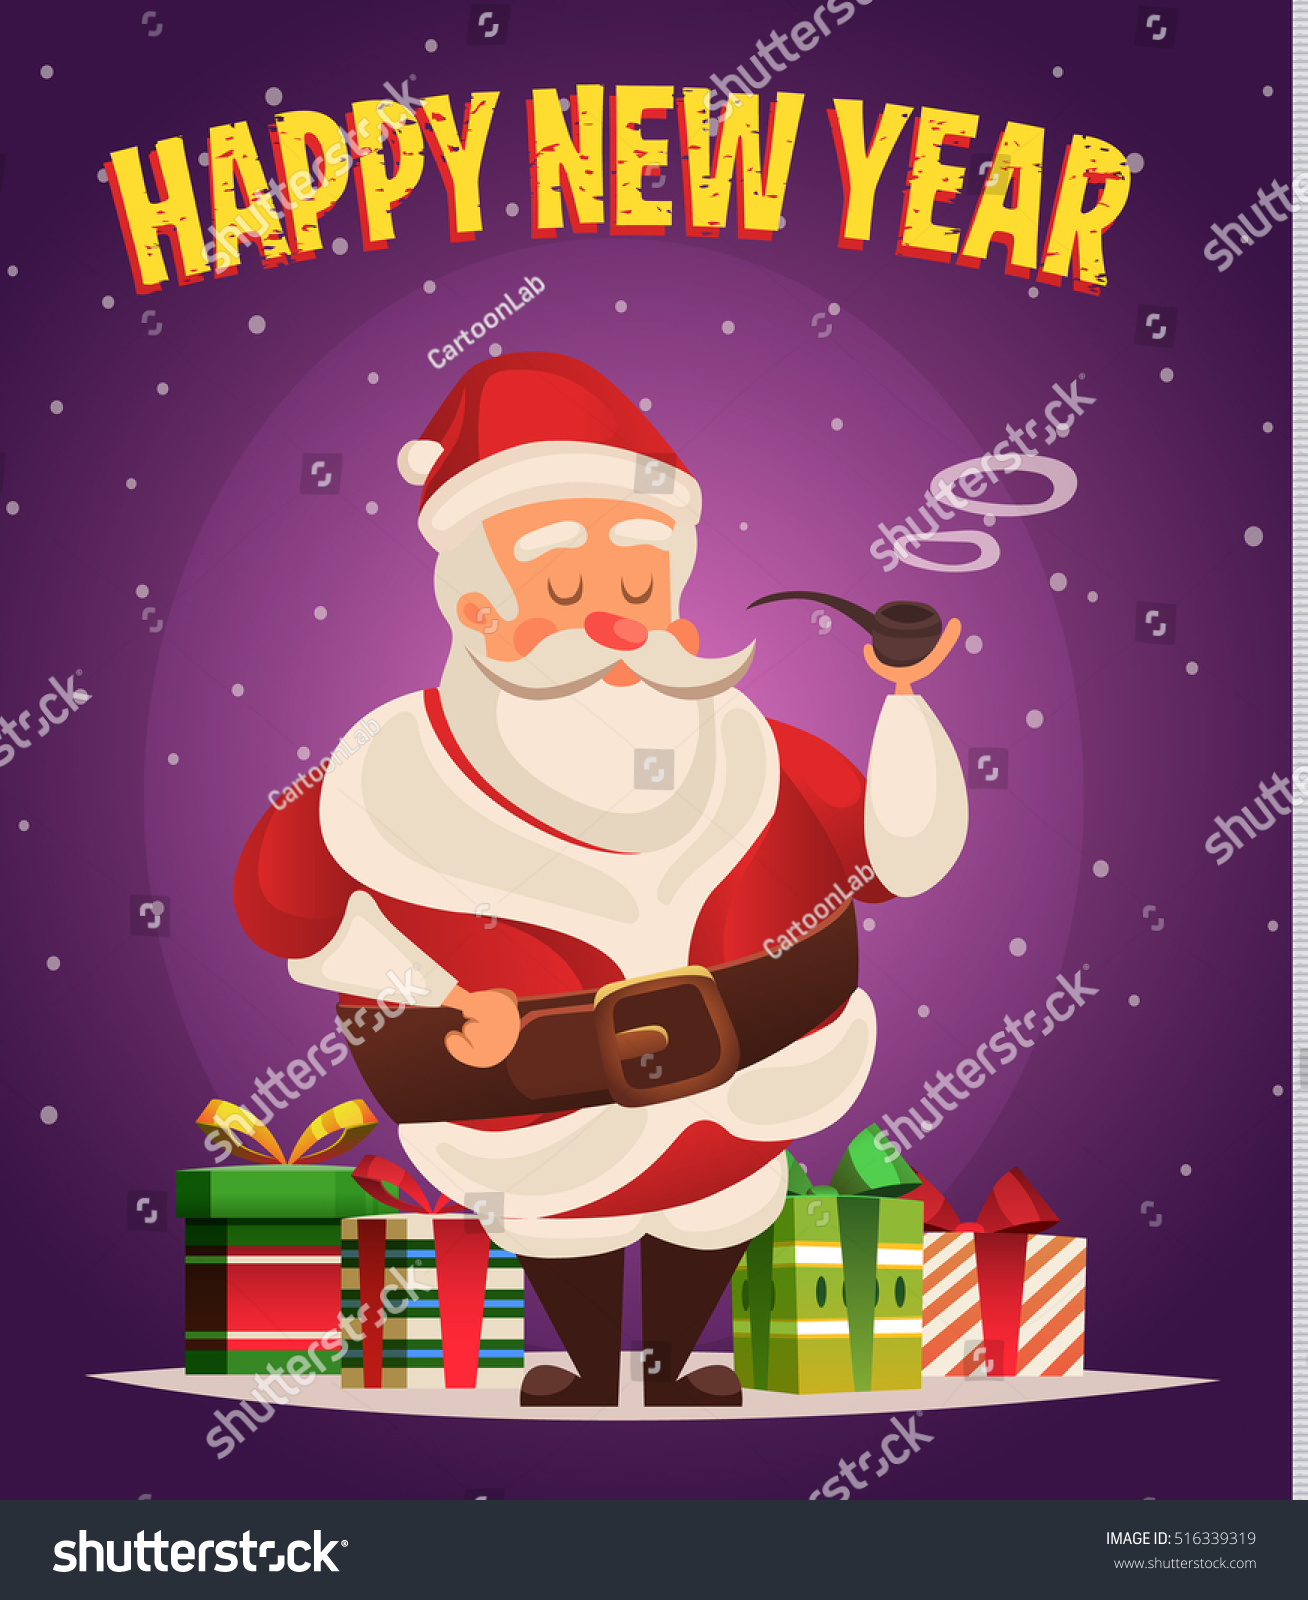 stock vector santa claus merry christmas poster new year poster vector illustration